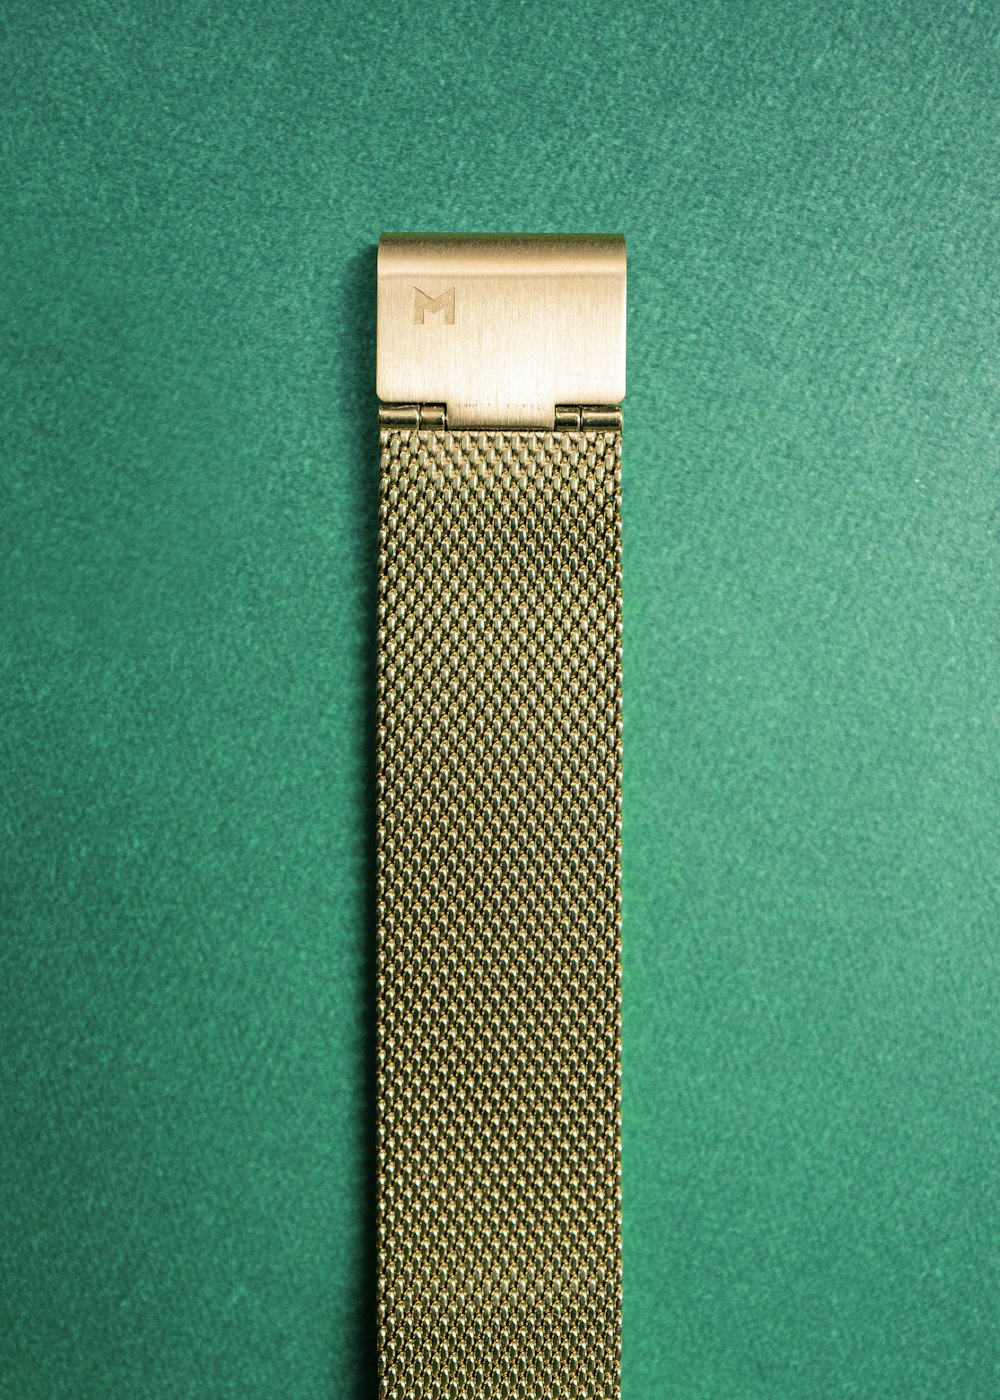 silver and white band on green textile